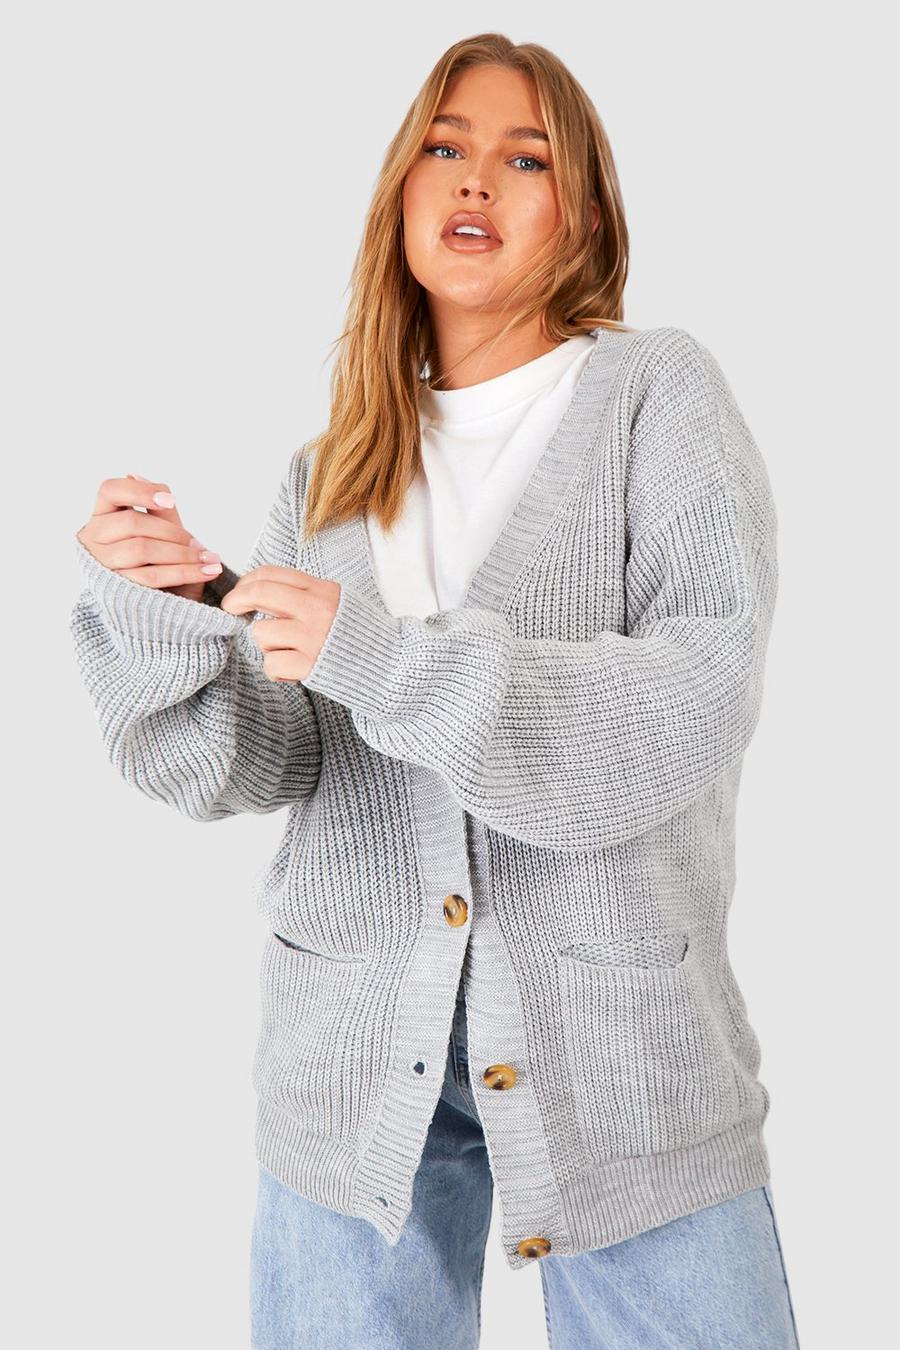 YONYWA Womens Plus Size Knit Cardigan Sweaters Oversized Open Front Button Down Fall Loose Lightweight Coats with Pocket 